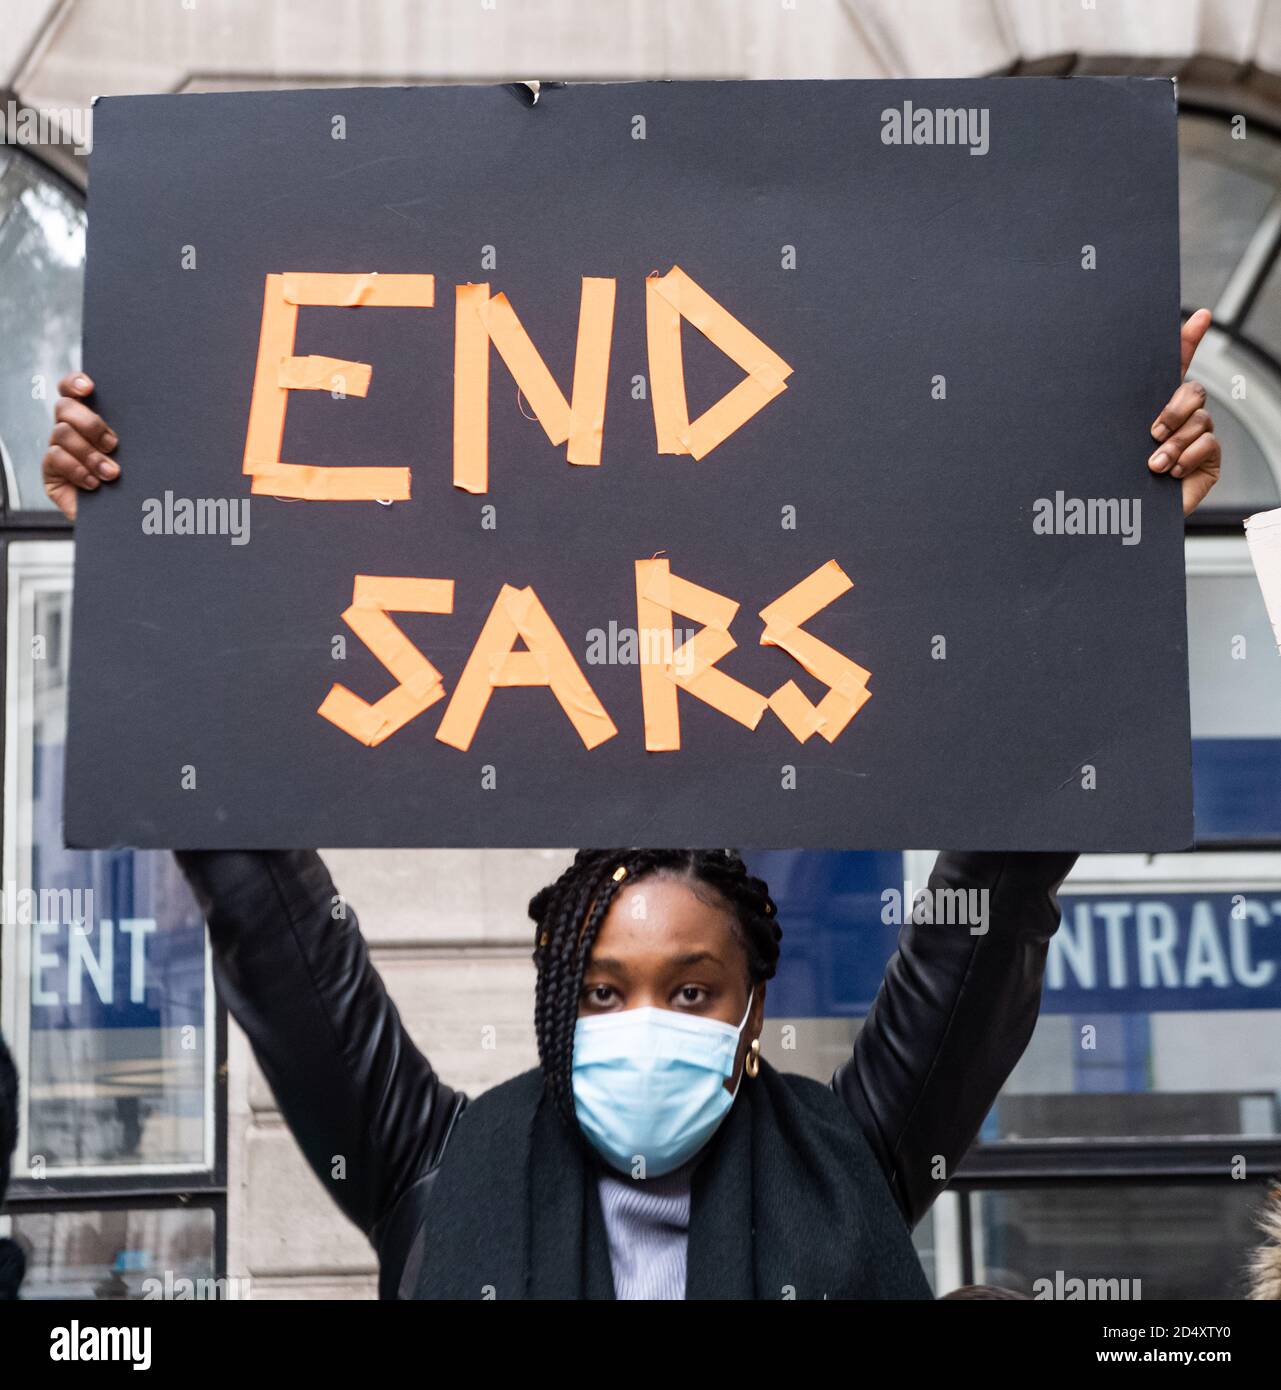 London, United Kingdom. 11th Oct, 2020. protesters are calling for the scrapping of police unit, known as Special Anti-Robbery Squad (SARS) over the squads incessant harassment and brutality of innocent Nigerians. Credit: Michael Tubi/Alamy Live News Stock Photo